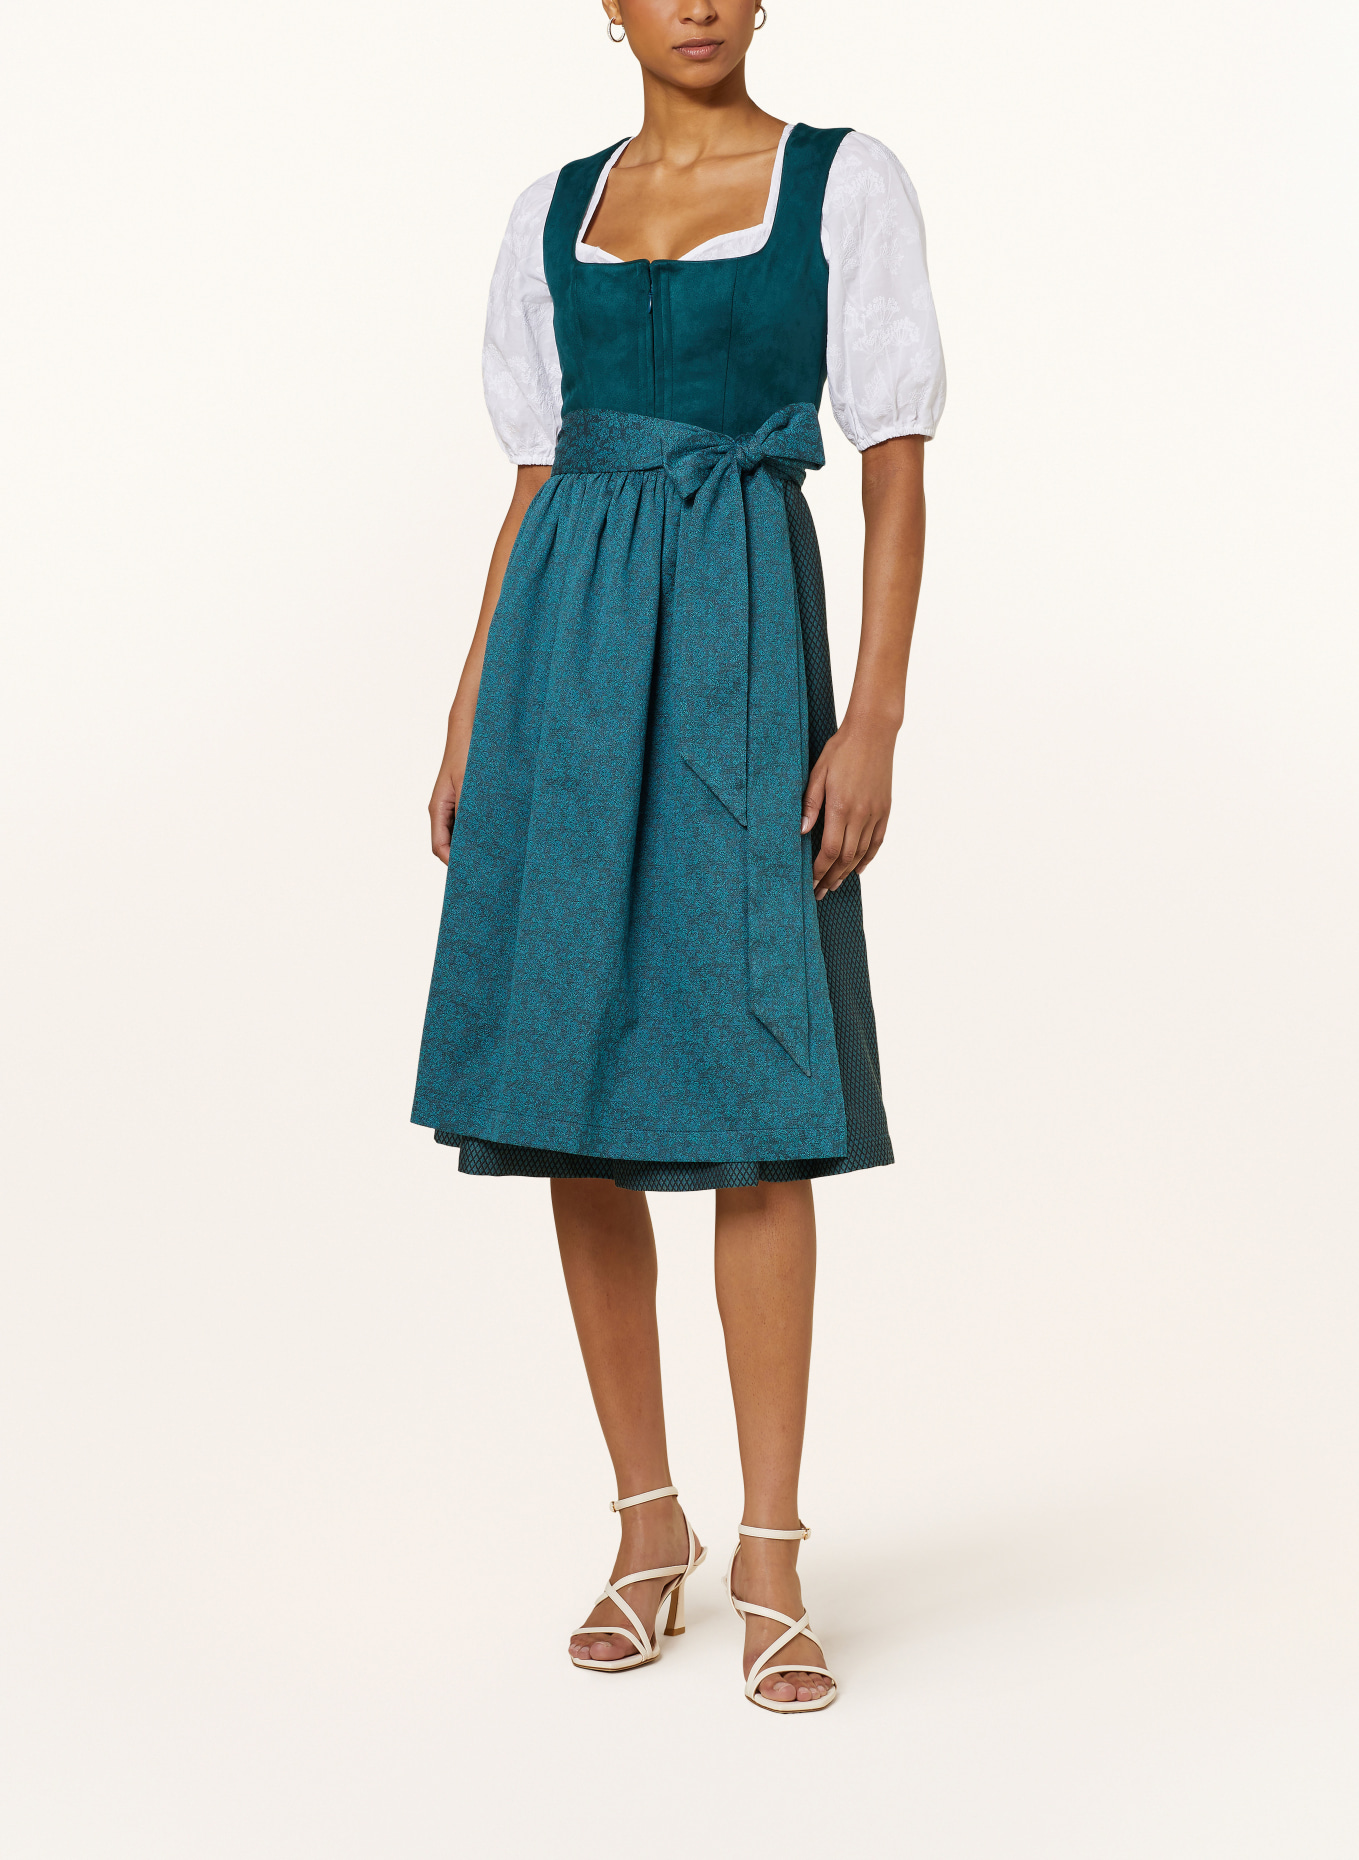 LIMBERRY Dirndl, Color: TEAL/ TURQUOISE/ DARK GRAY (Image 2)